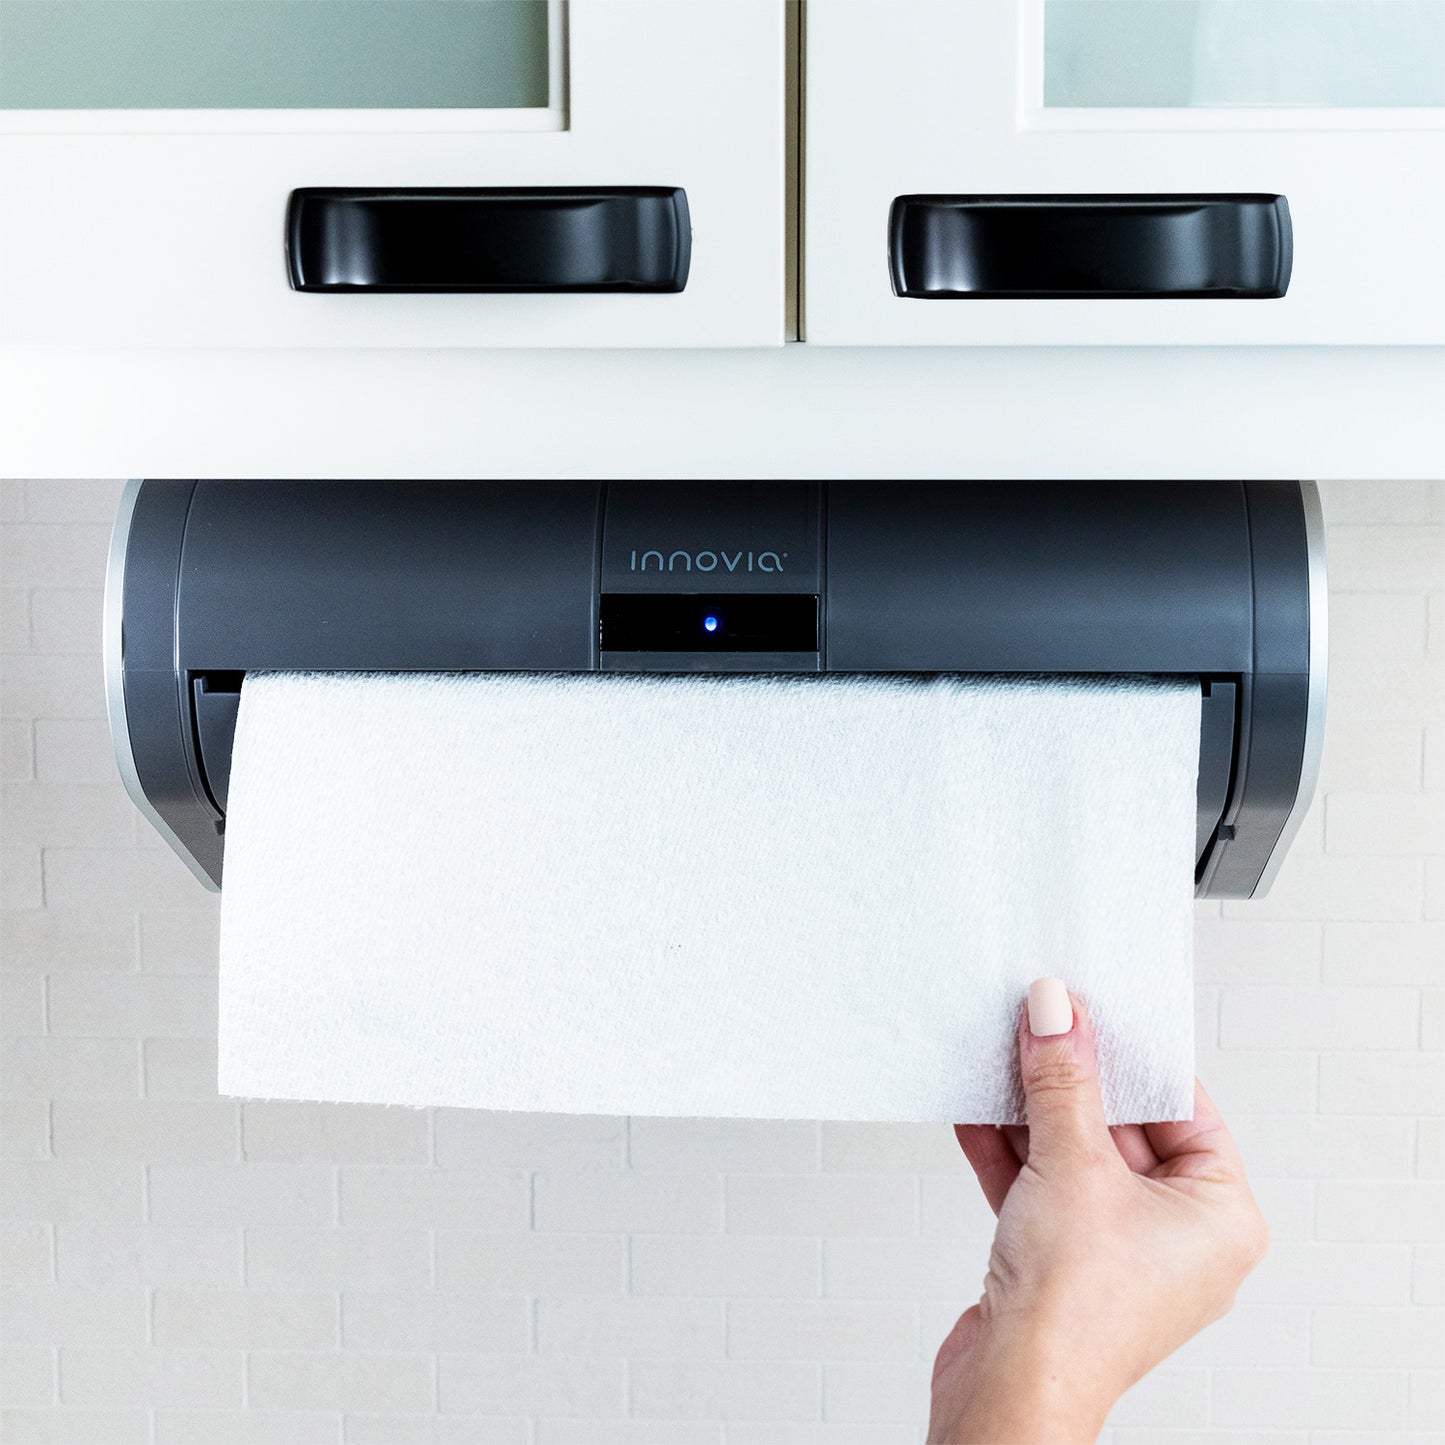 New! Innovia Countertop Touchless Paper Towel Dispenser in